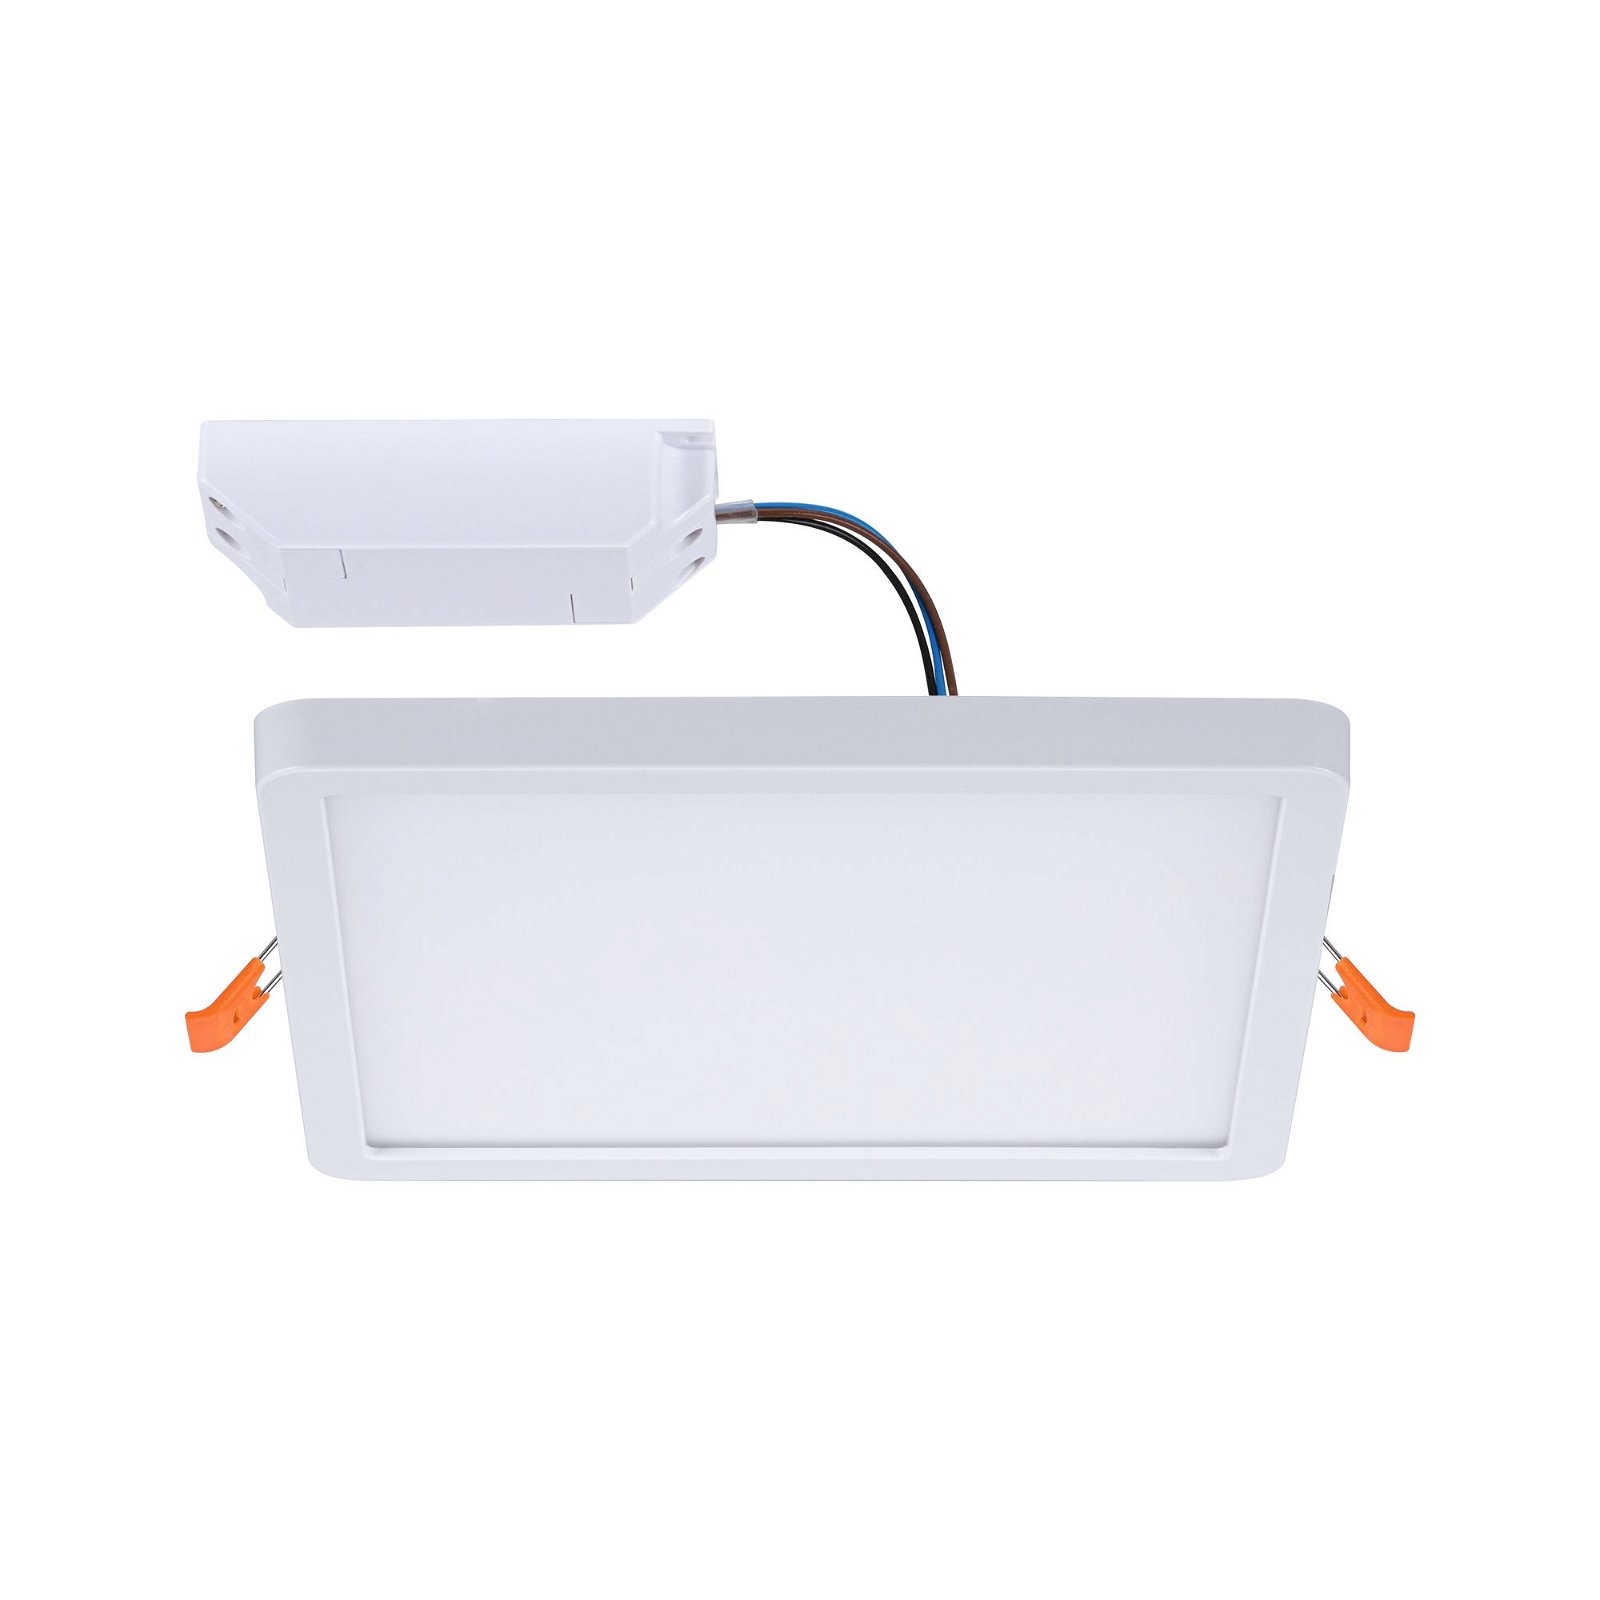 VariFit LED Recessed panel Smart Home Zigbee Areo IP44 square 175x175mm Tunable White White